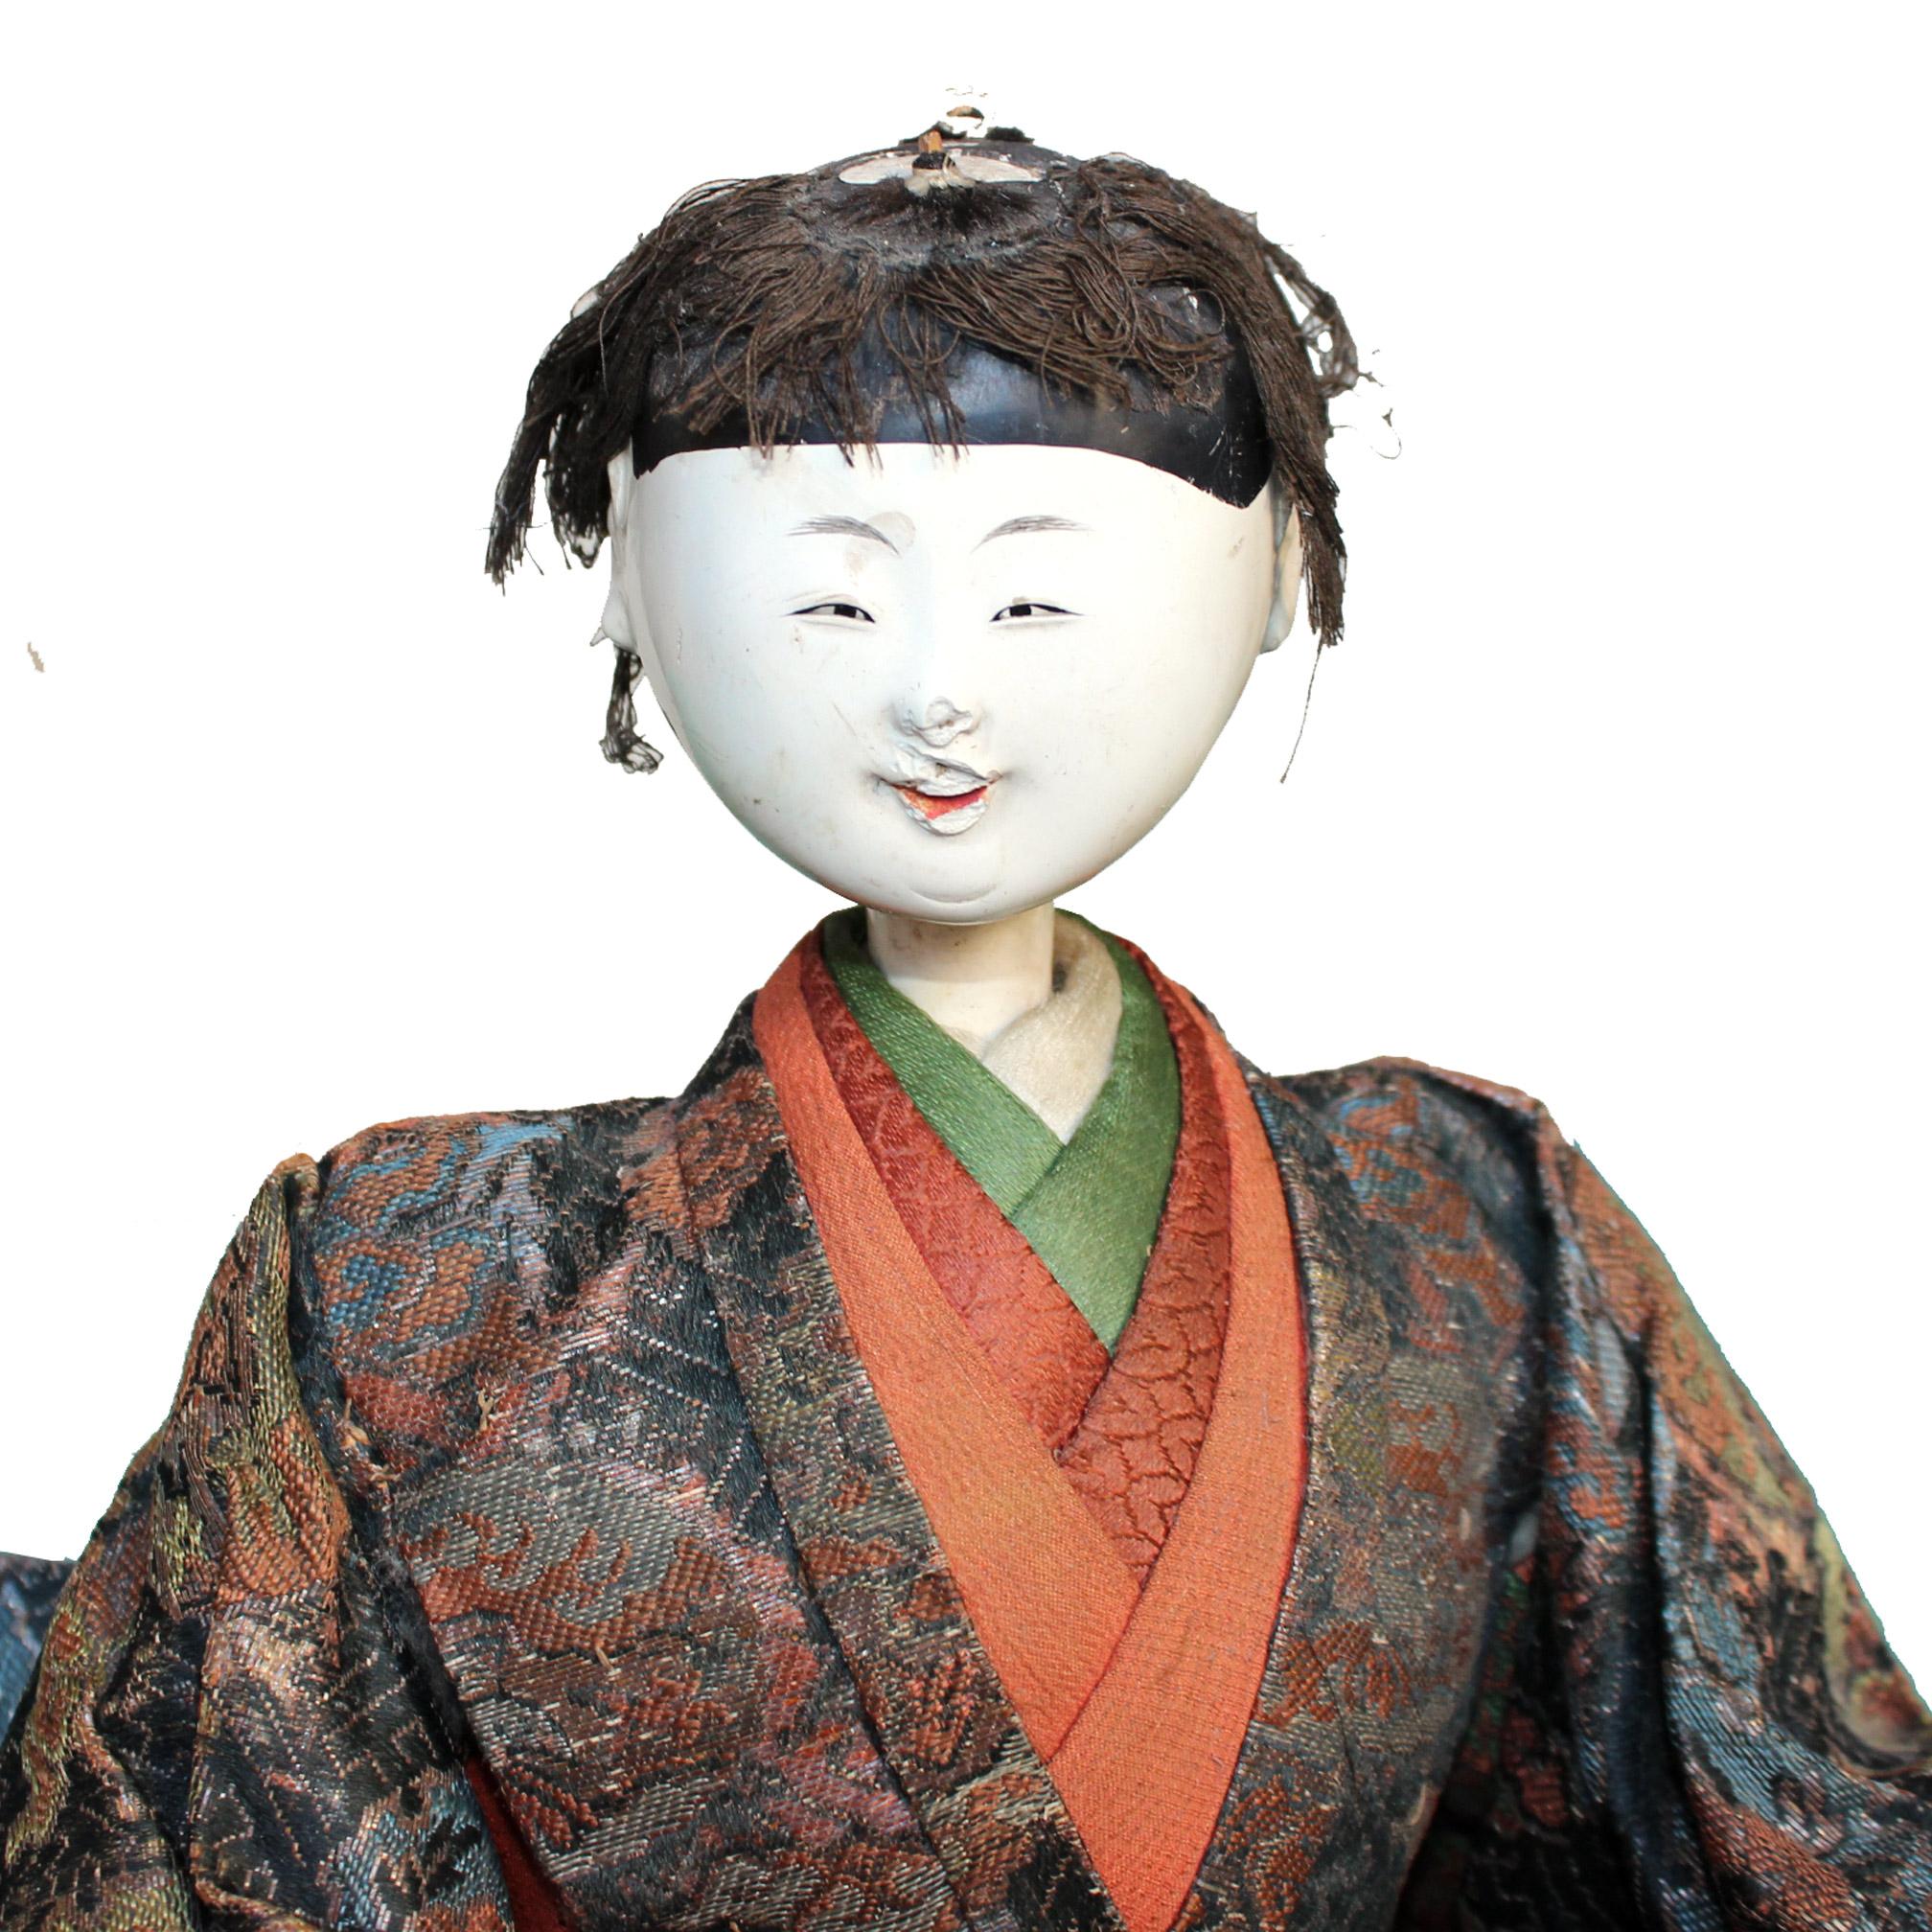 Master artisans skillfully crafted the Kyoto doll with white lacquered wood head and hands, dressed in Classic Japanese style clothes made from antique kimono textiles. Doll depicts one of the musicians in traditional Japanese Noh theatre. Meiji